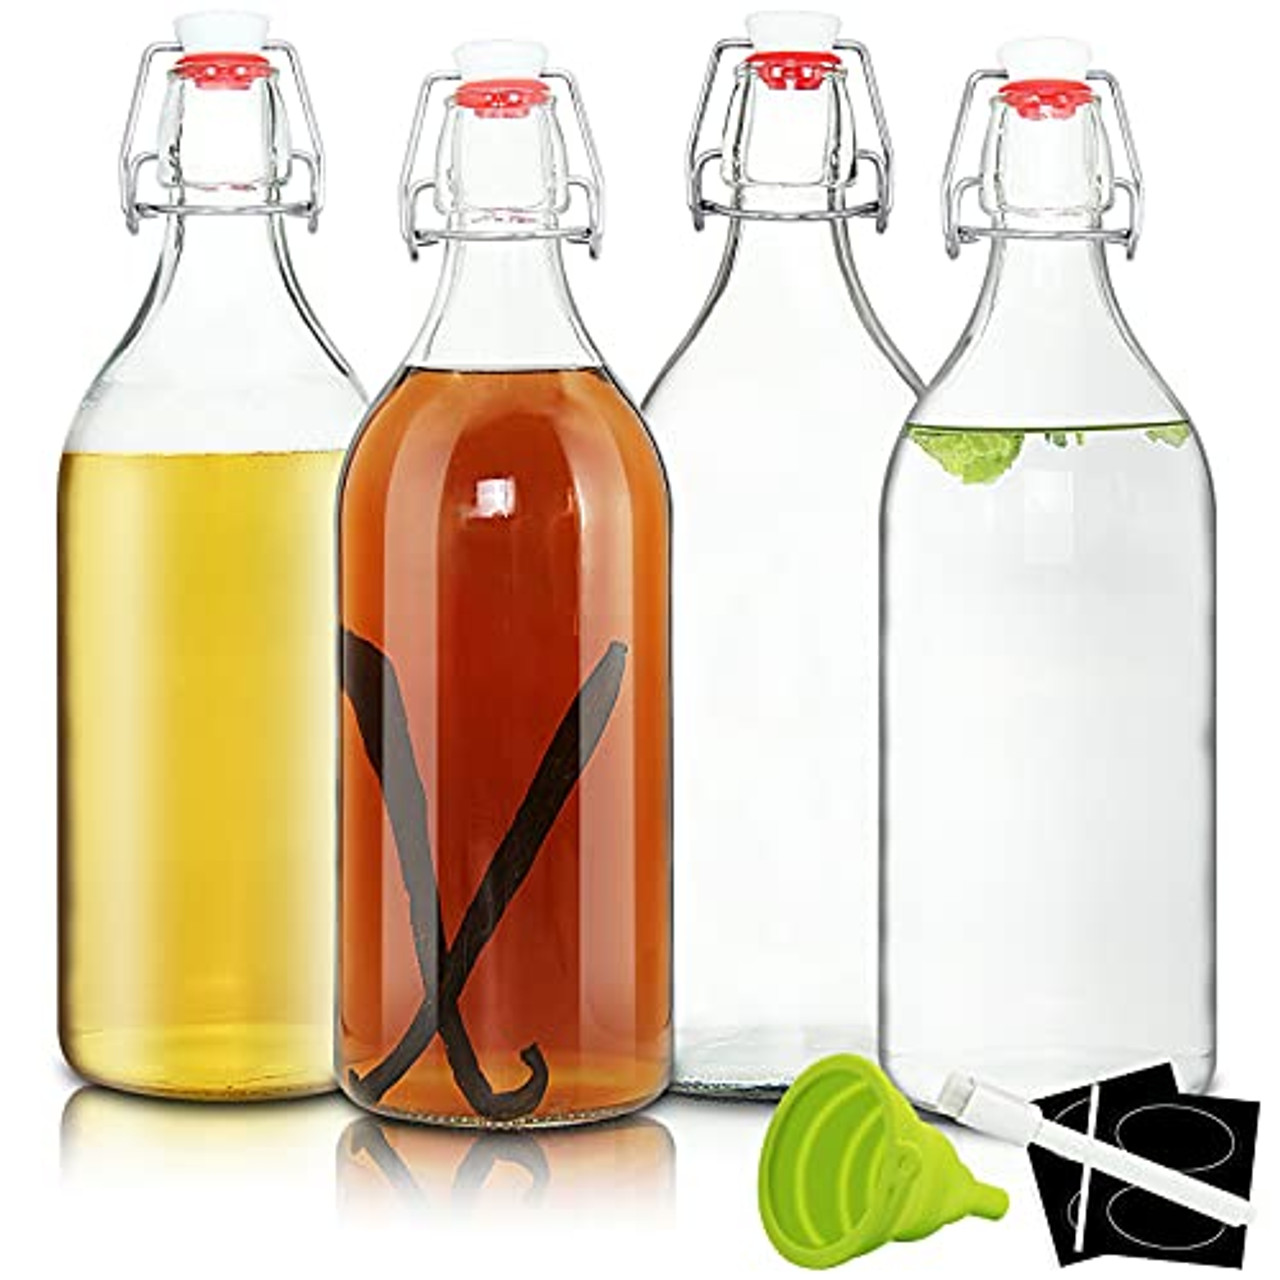 32oz Swing Top Bottles -Glass Beer Bottle with Airtight Rubber